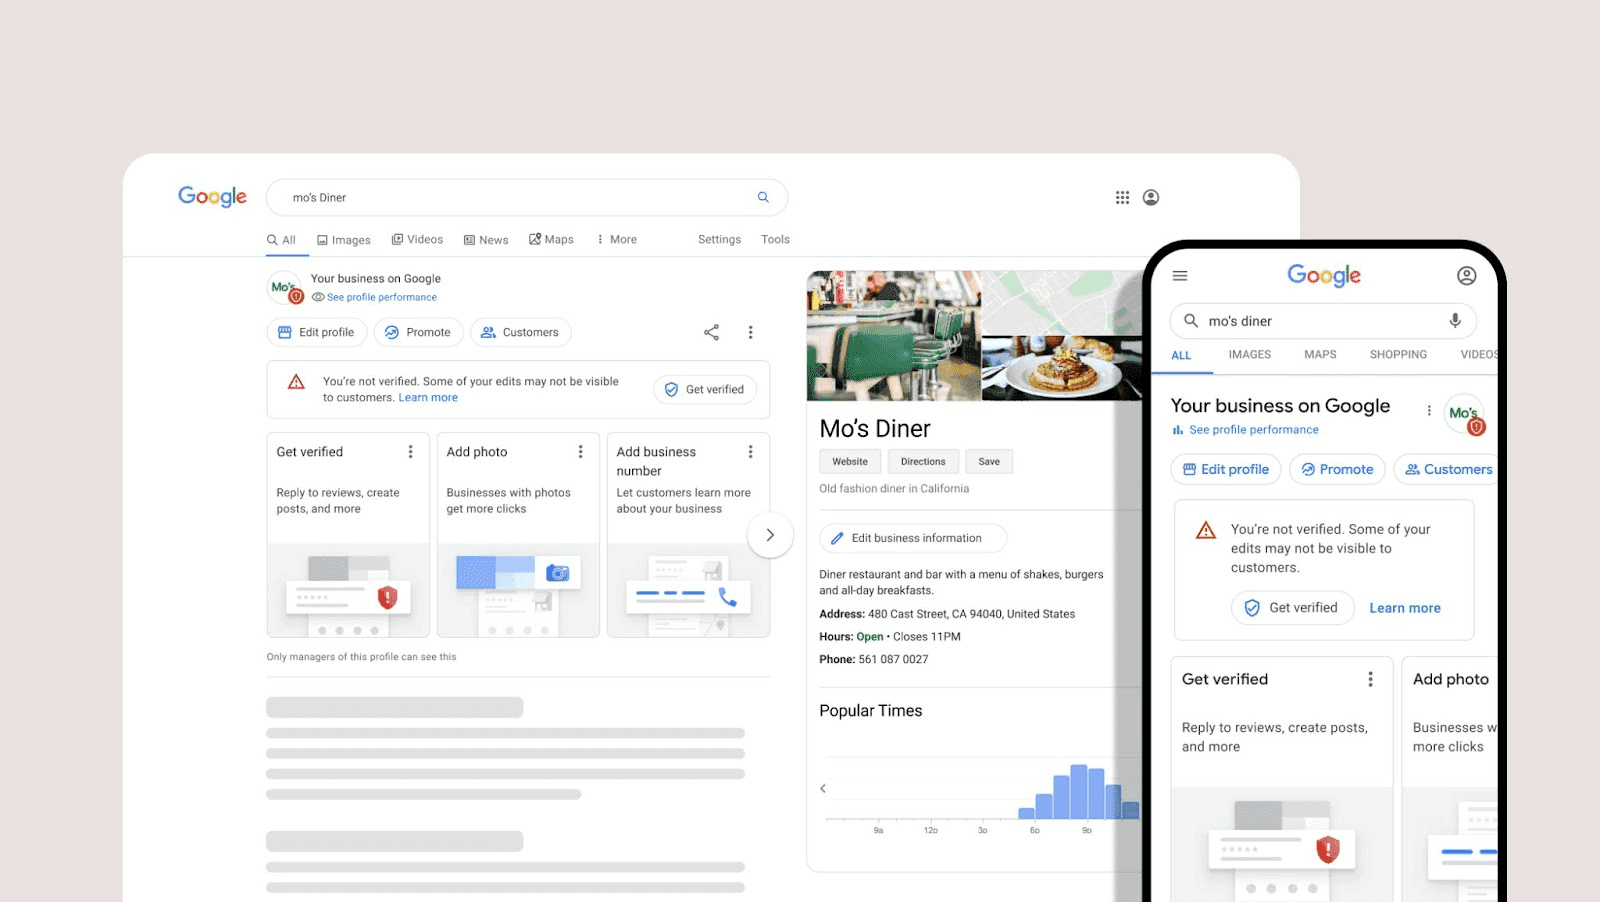 Google business page of Mo's Diner